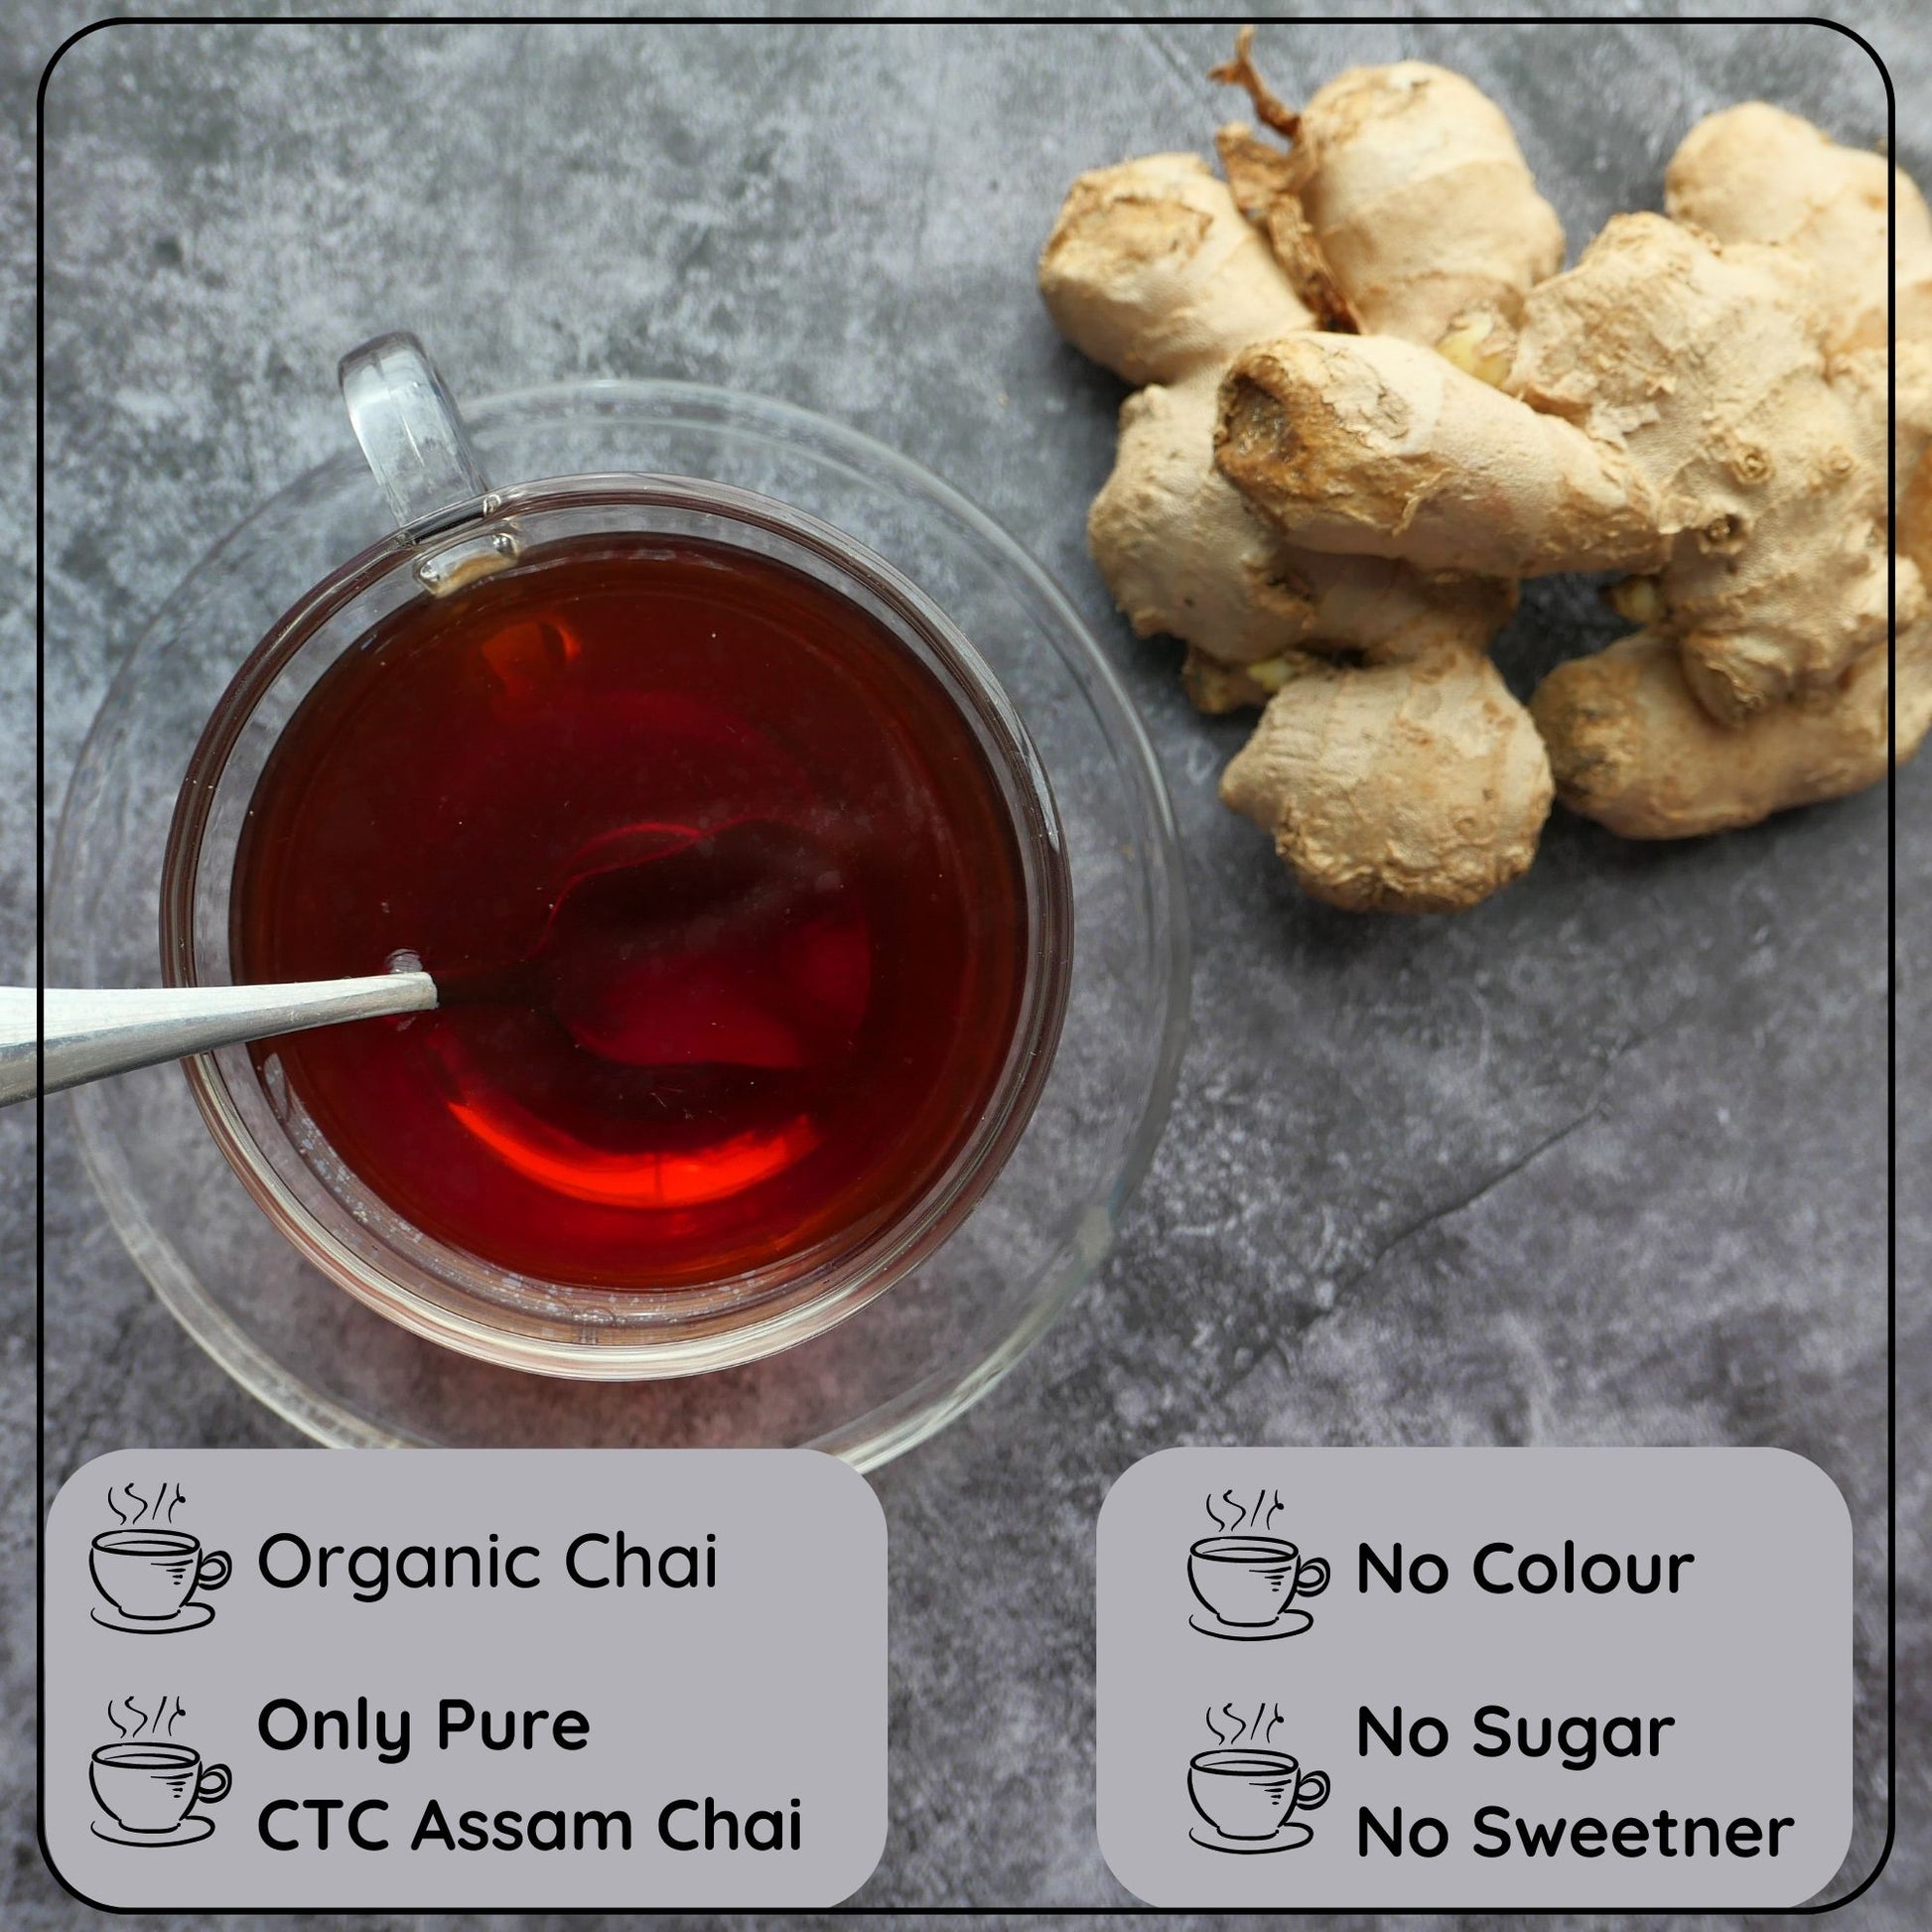 ZESTFUL Ginger Chai - The Benefits of Zestful Ginger Chai for Your Health and Wellness - Radhikas Fine Teas and Whatnots